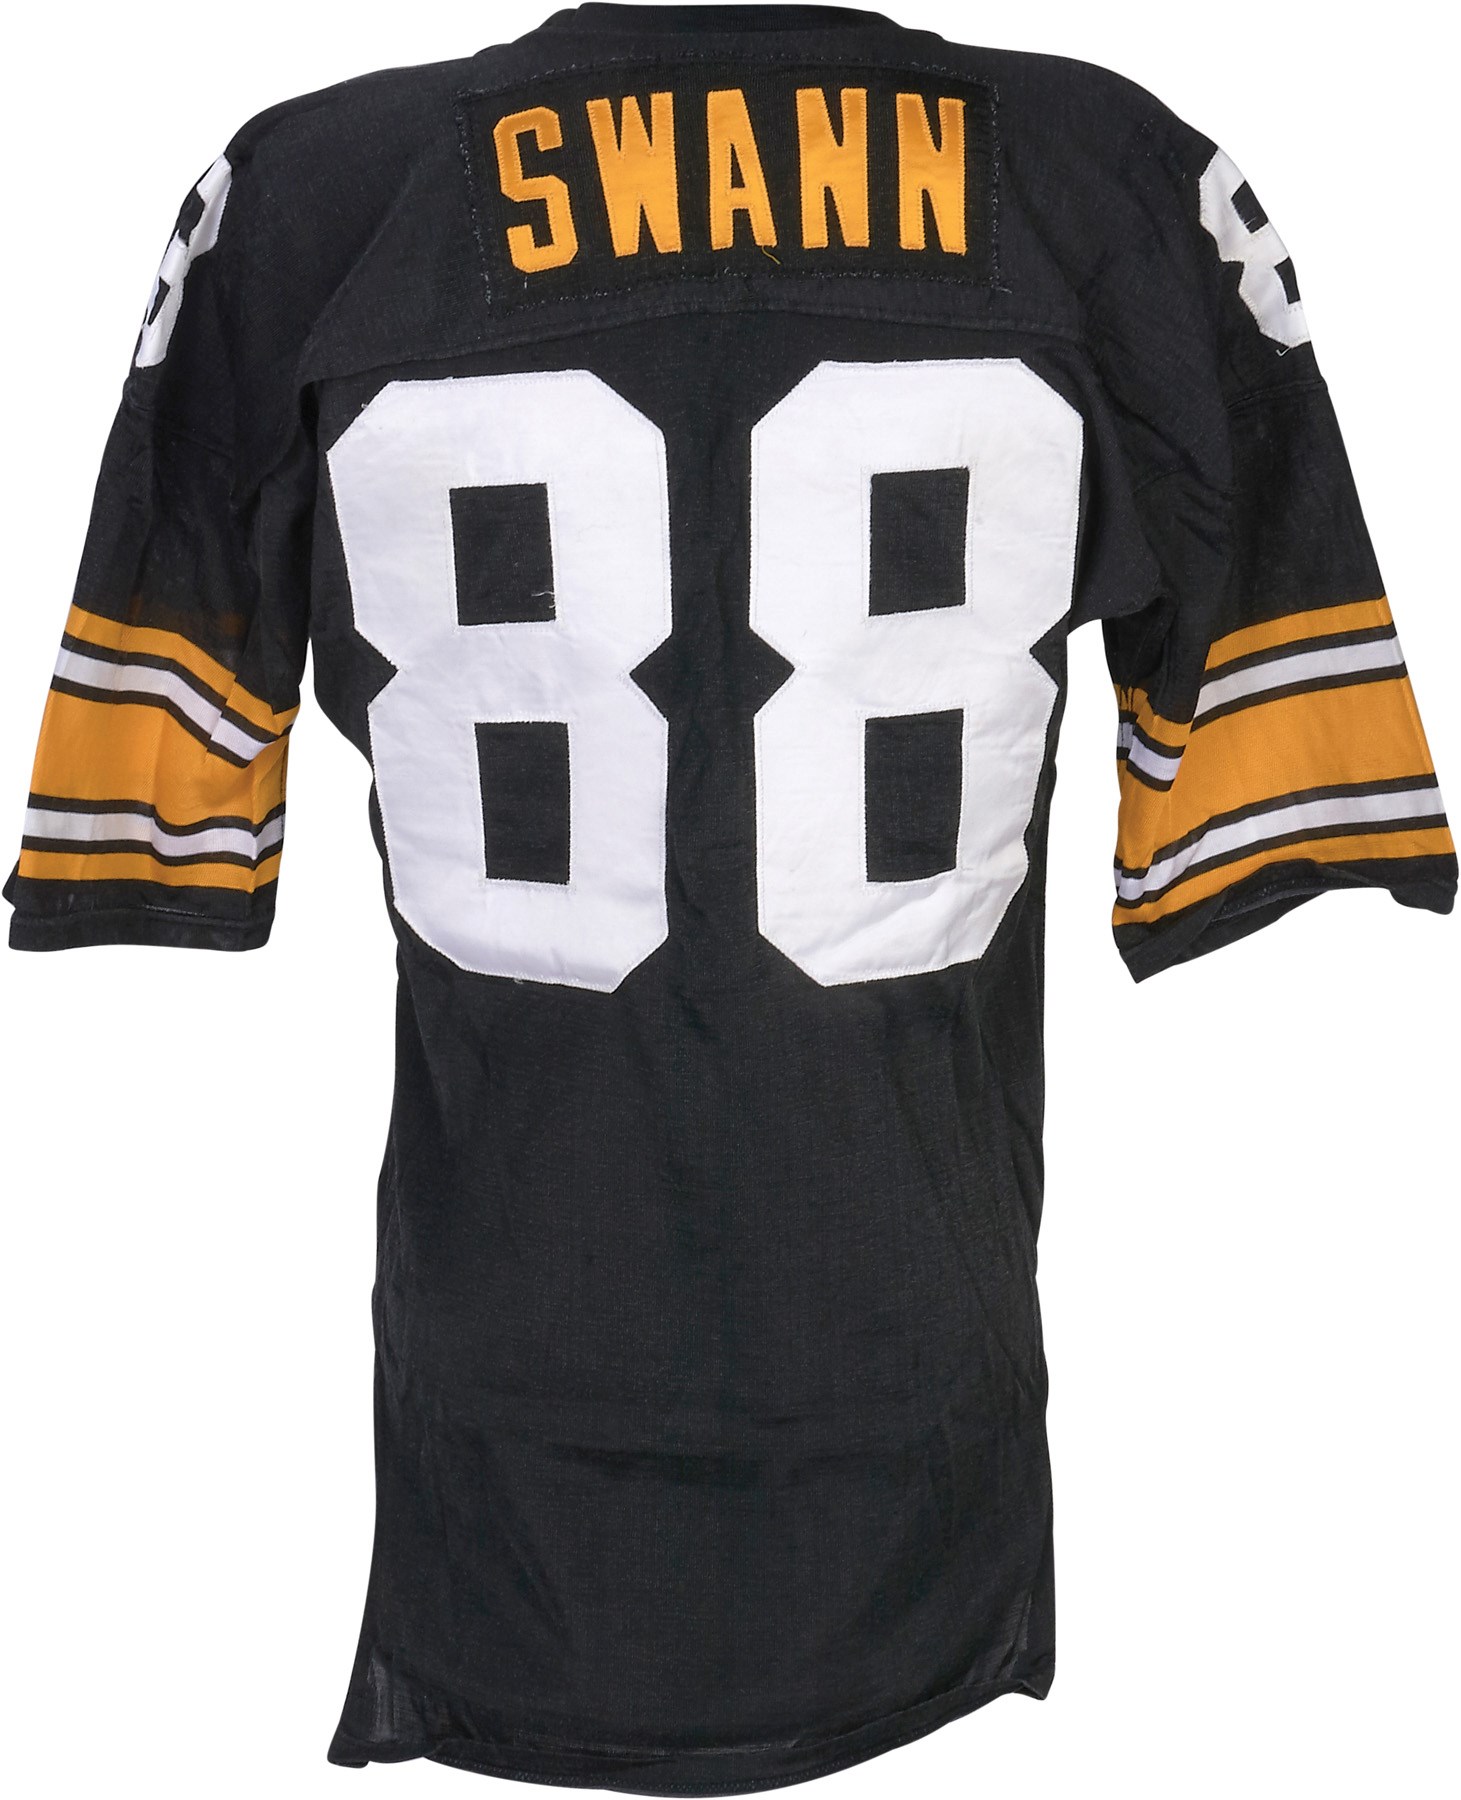 1982 Lynn Swann Pittsburgh Steelers Game Worn Jersey (Photo-Matched)